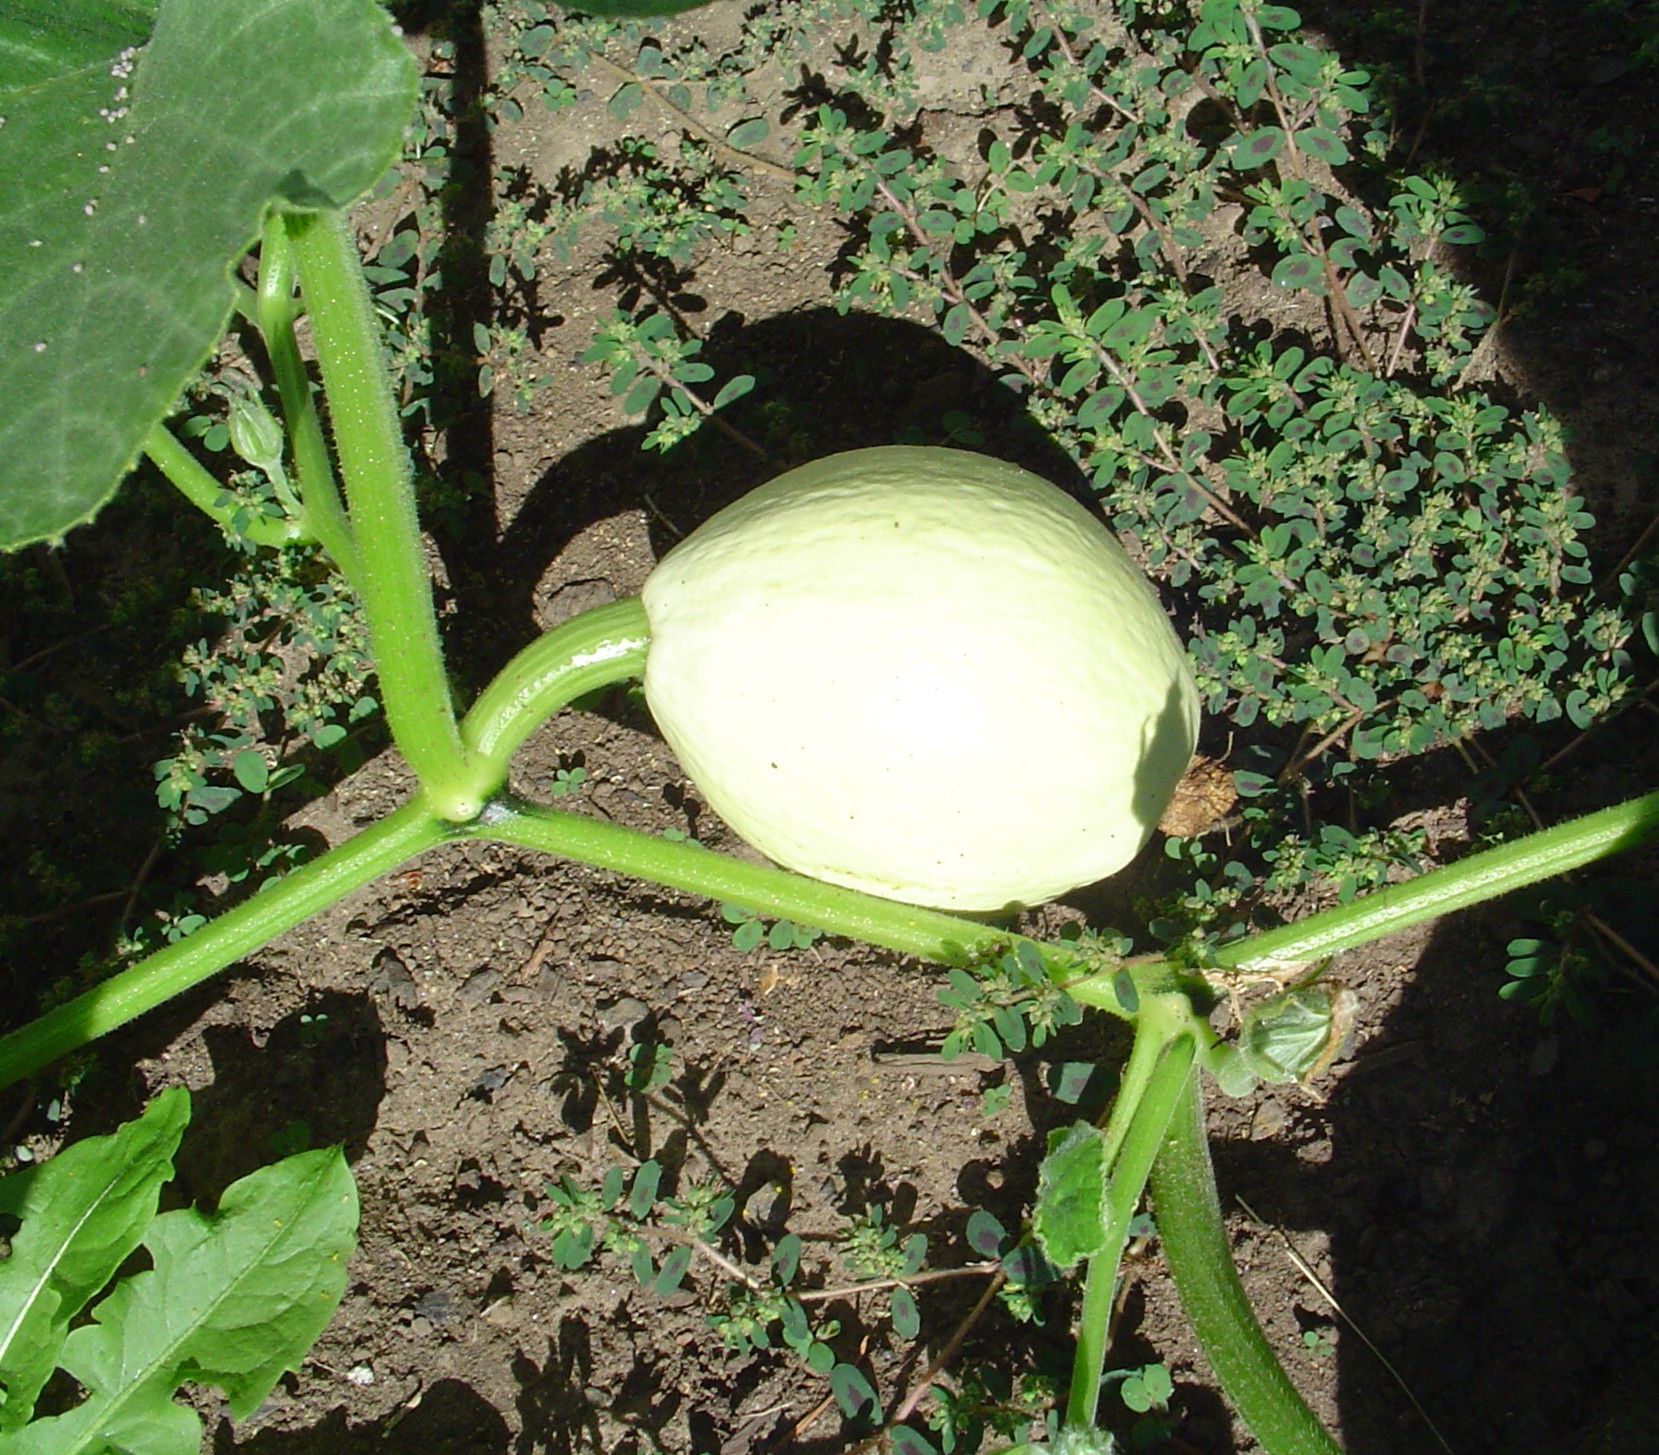 large squash still attached to the stem of a squash plant